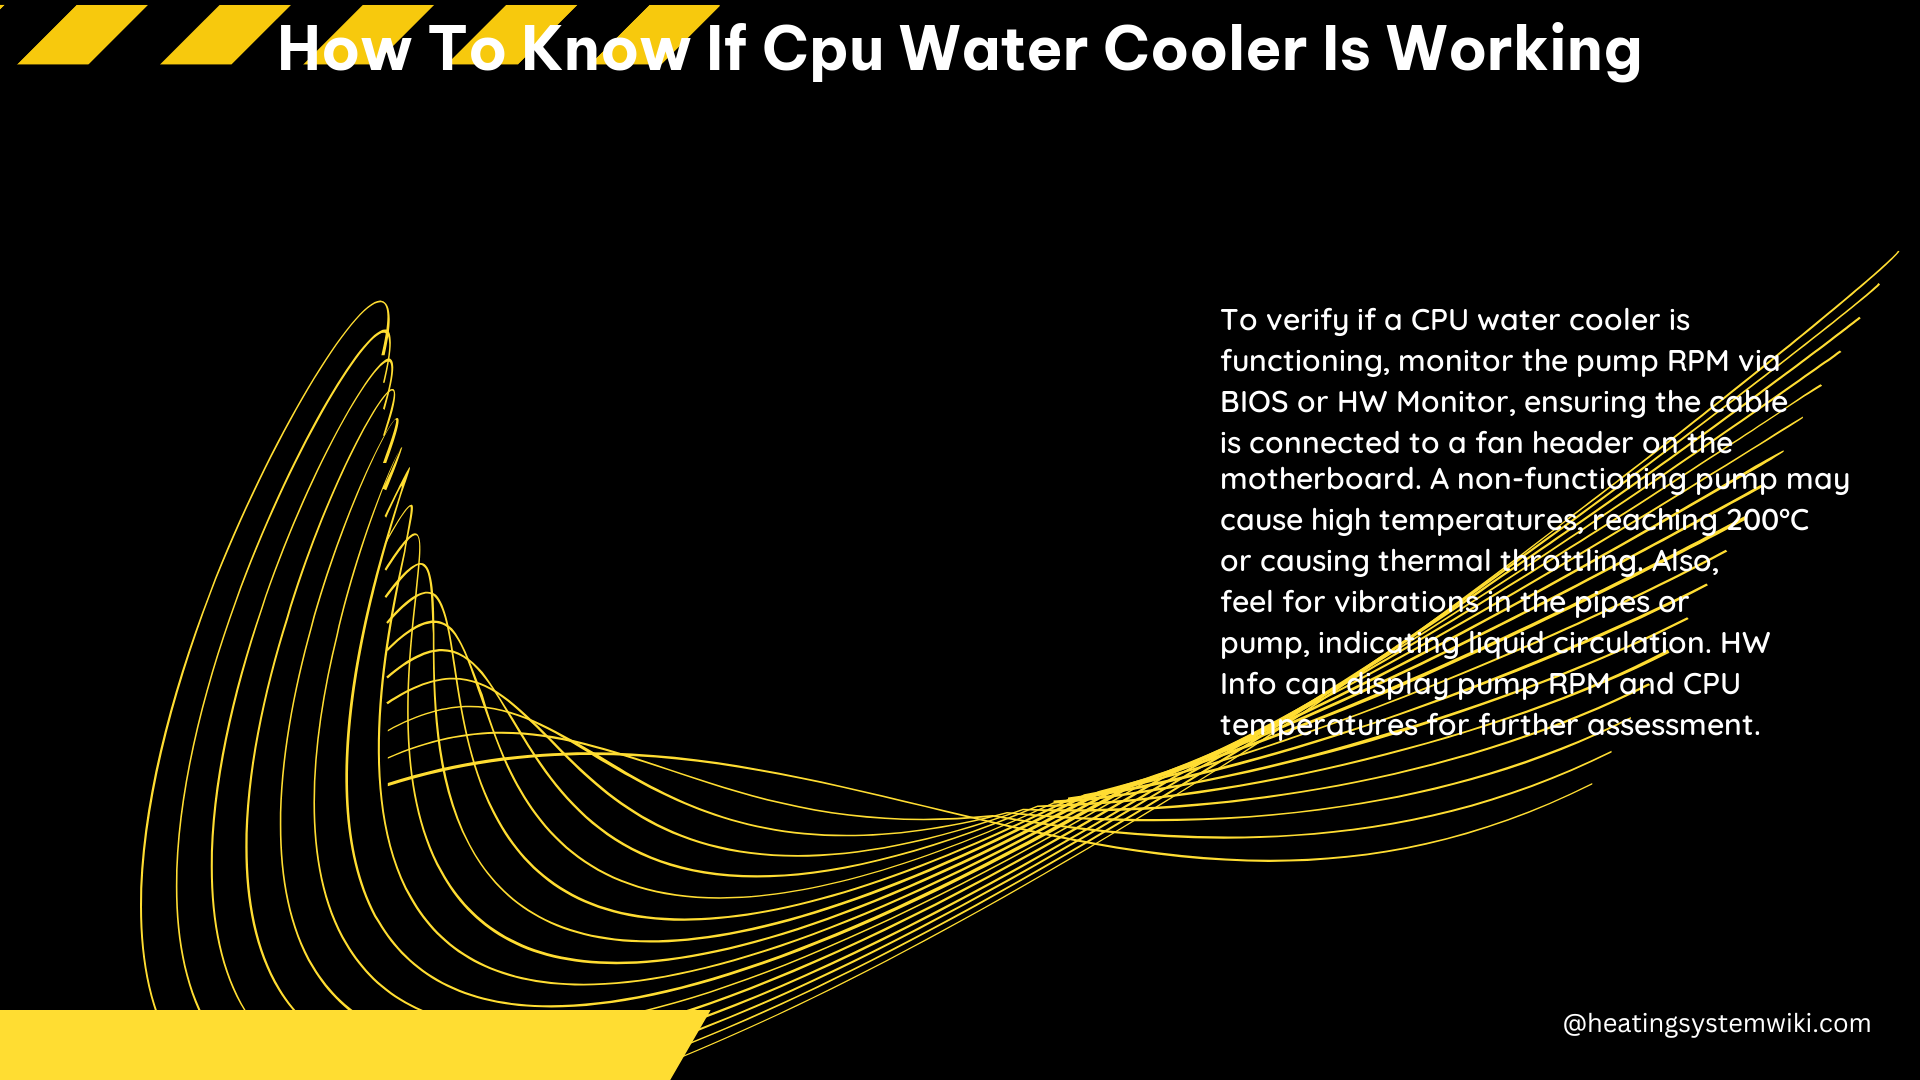 How to Know if CPU Water Cooler Is Working